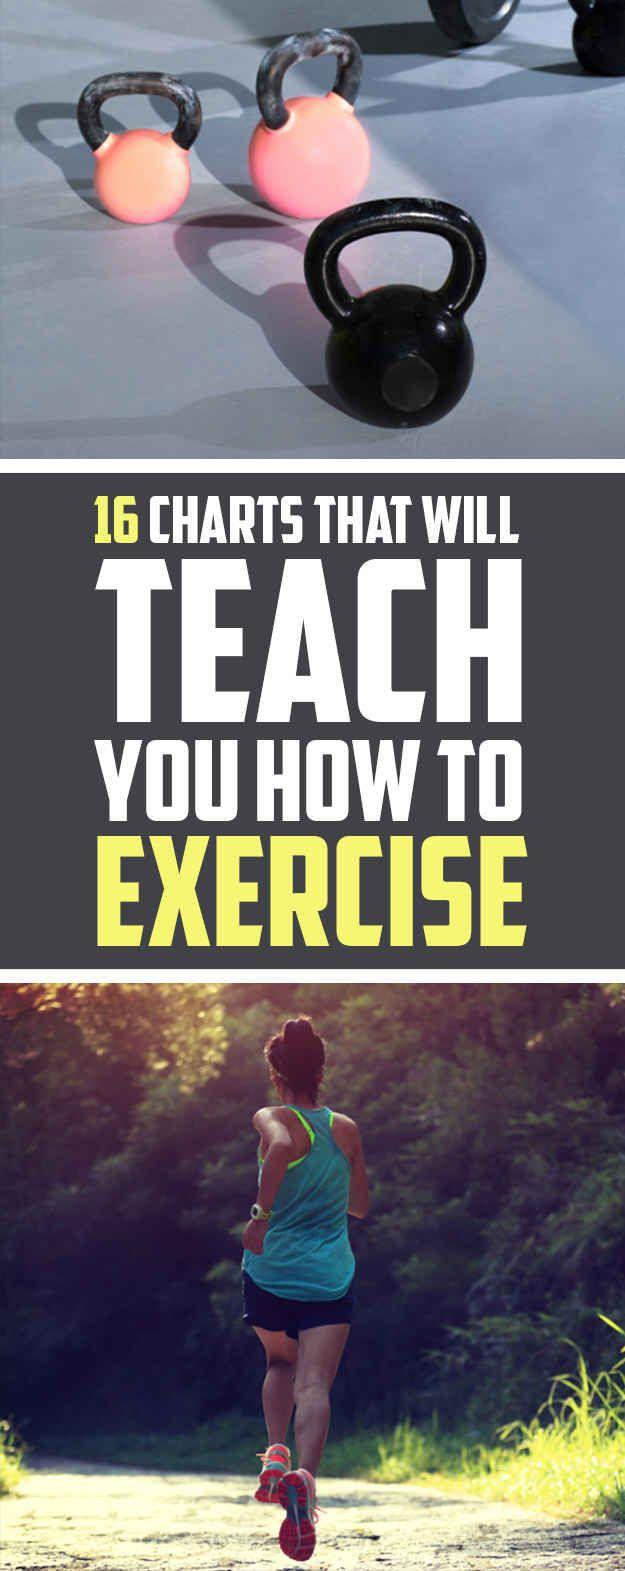 Wedding - 16 Super-Helpful Charts That Teach You How To Actually Work Out